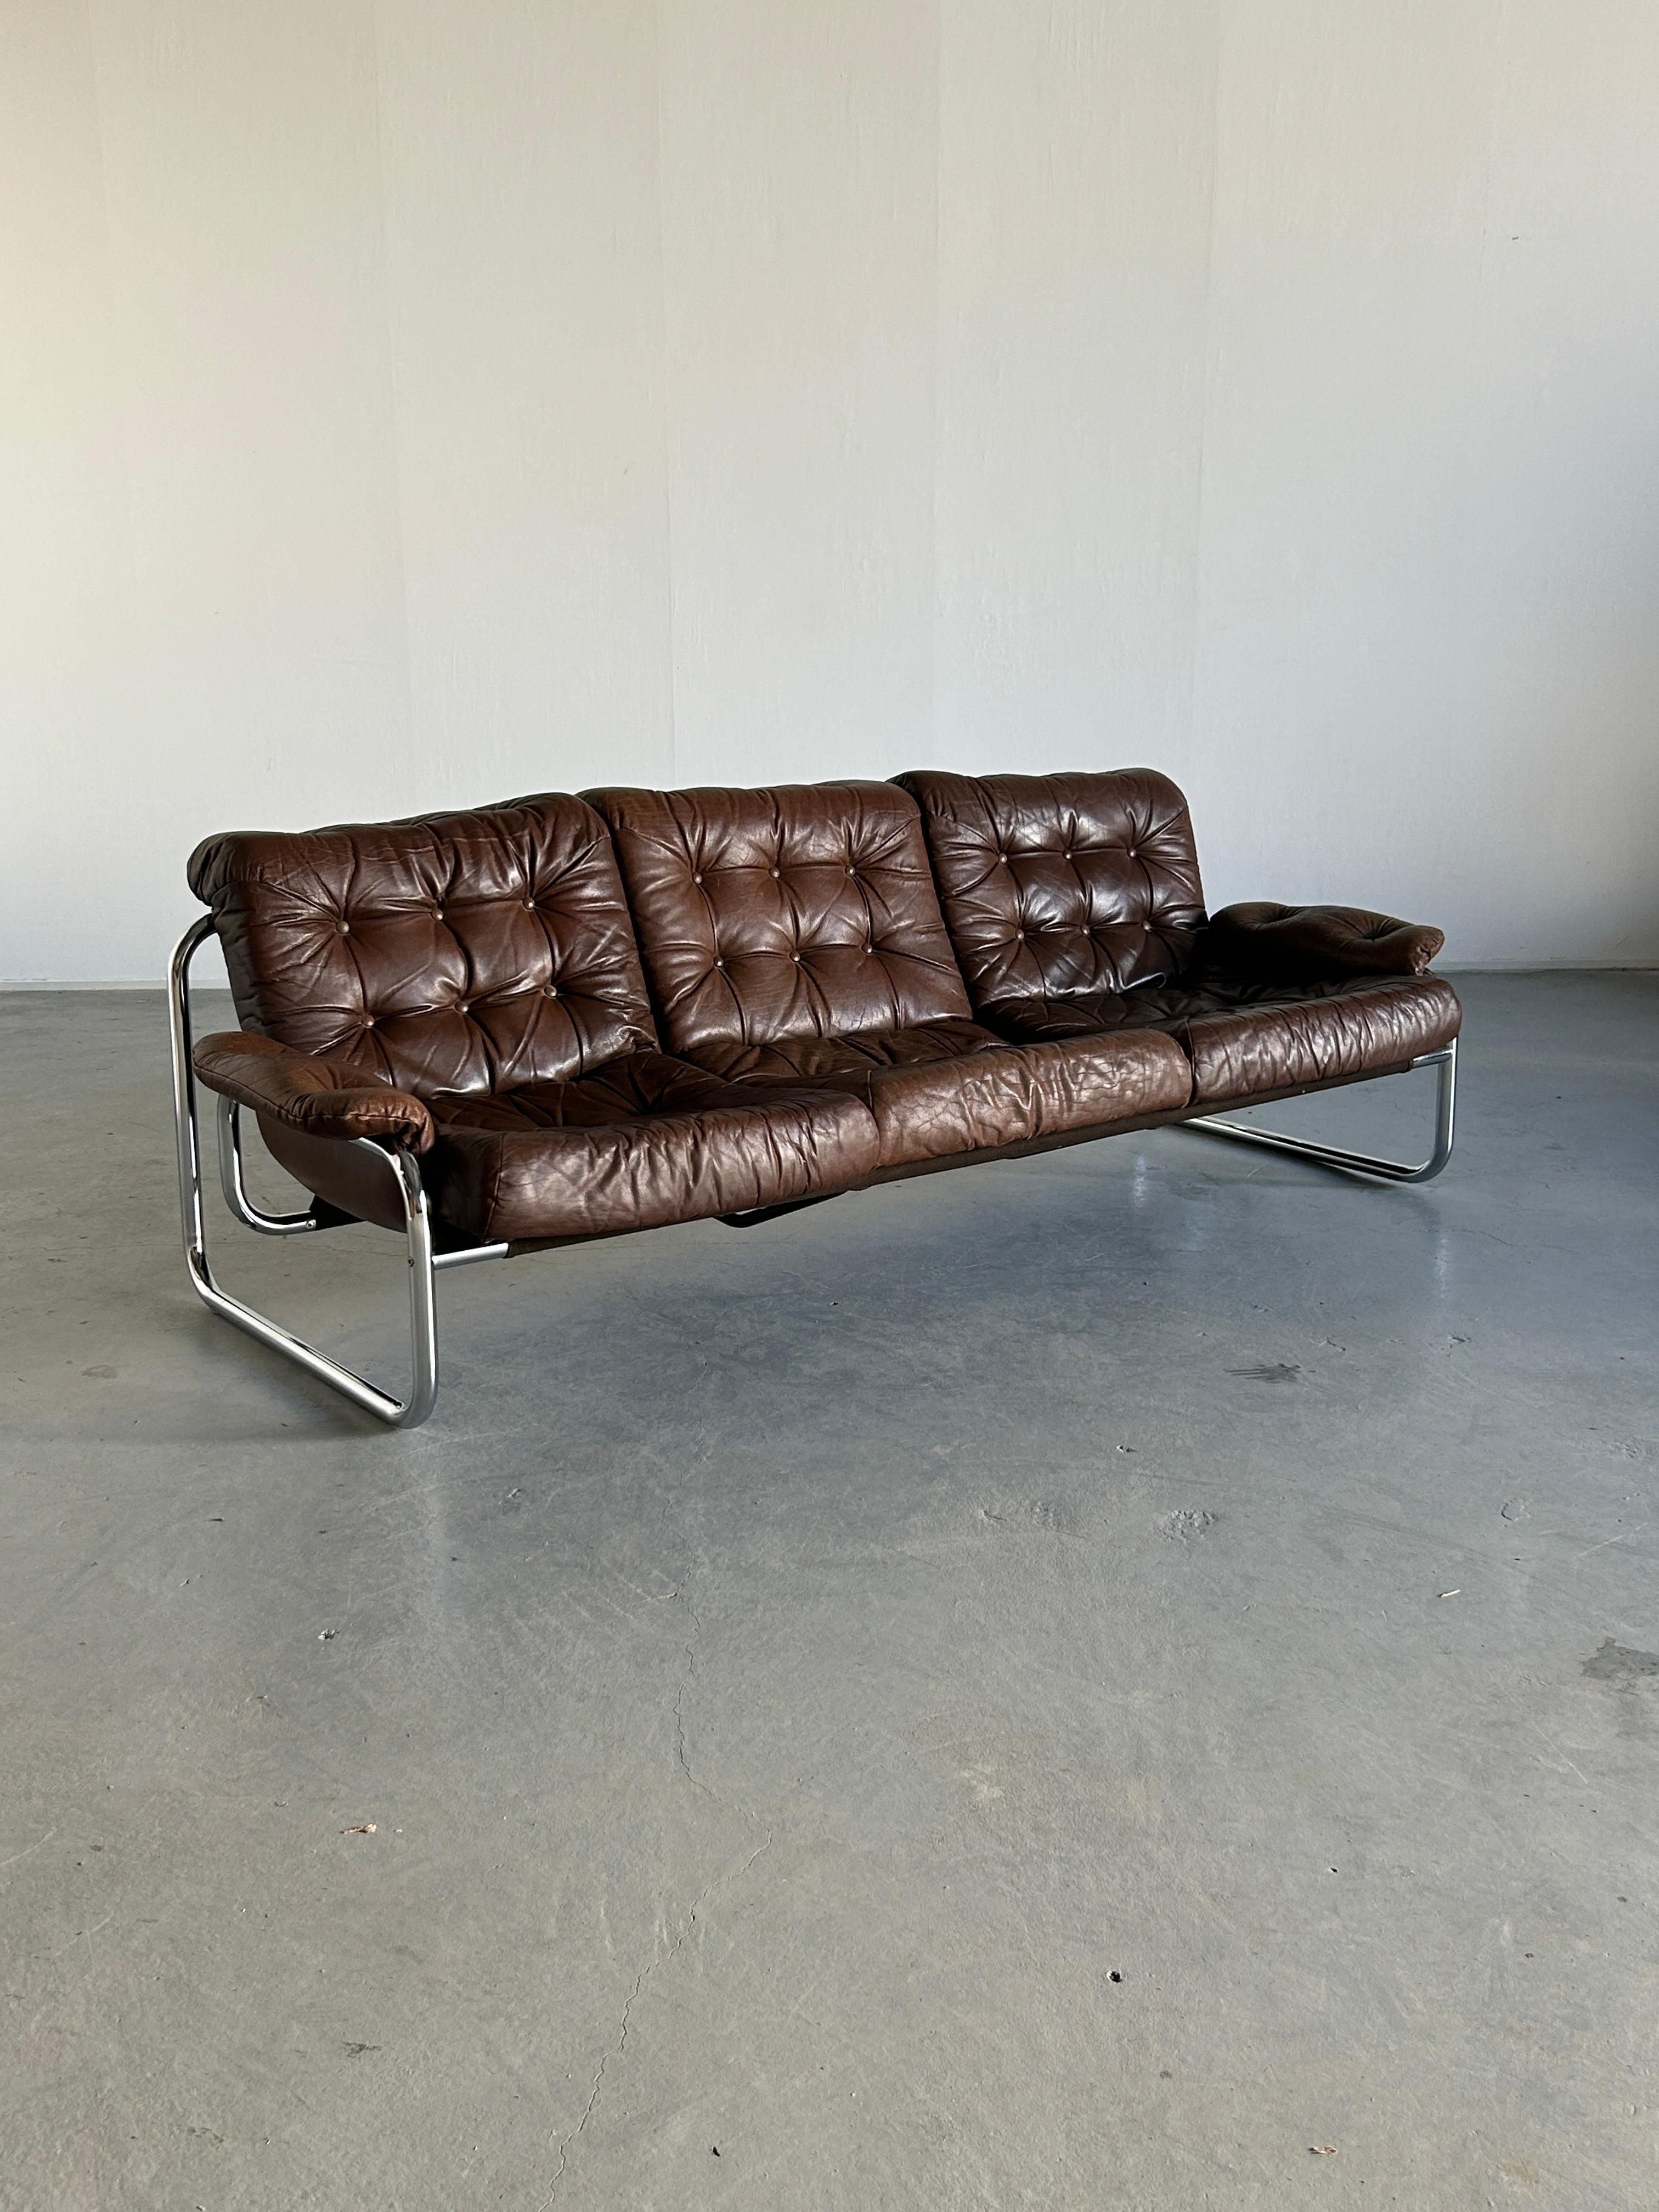 Swedish modern chromed tubolar steel and original brown leather tufted three-seater sofa by Johann Bertil Häggström for Ikea, 1970s.

This piece is one of the most successful IKEA products from the 1970s, and a very rare find.
Sourced from a Swedish